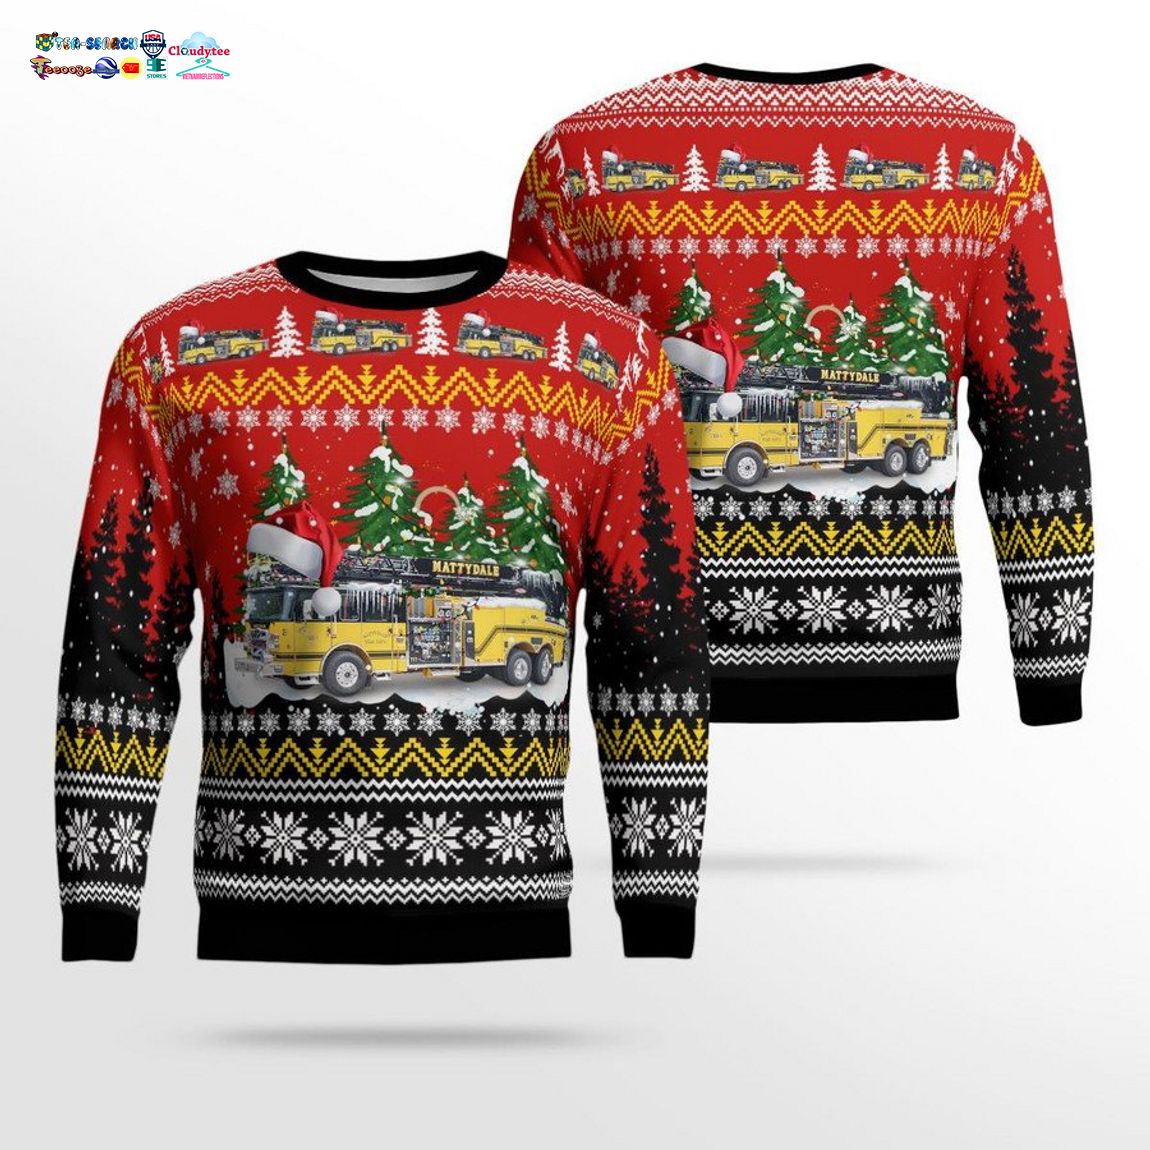 New York Mattydale Fire Department 3D Christmas Sweater - Elegant and sober Pic